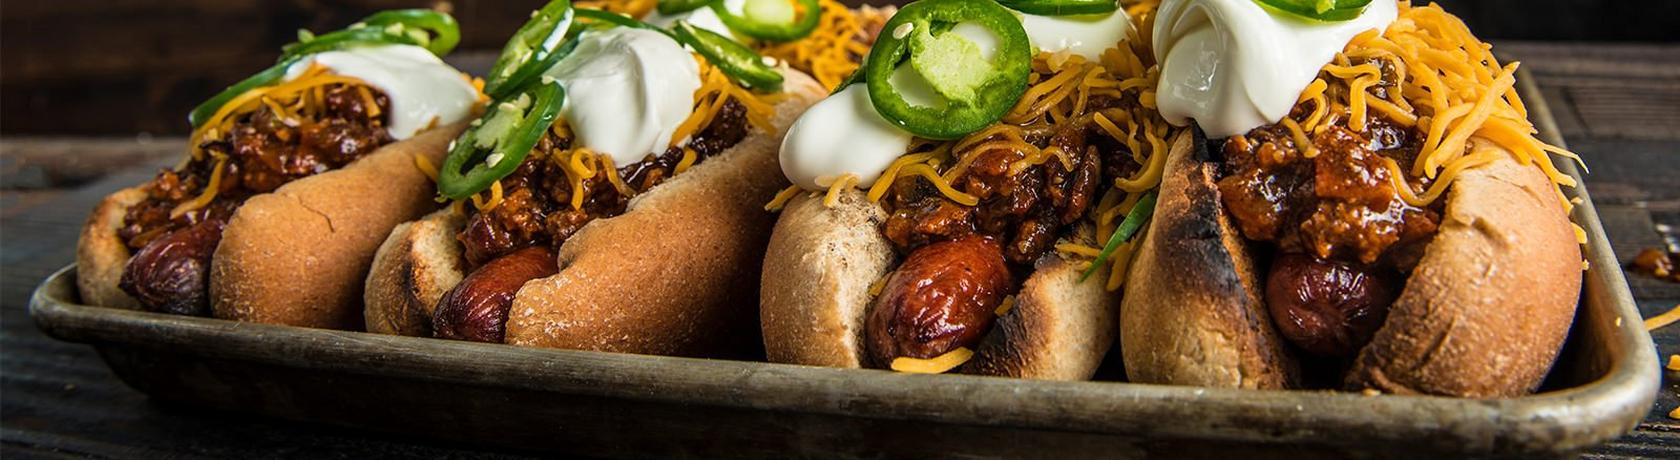 20180913_Bacon-Chili-Cheese-Dogs_RE_HE